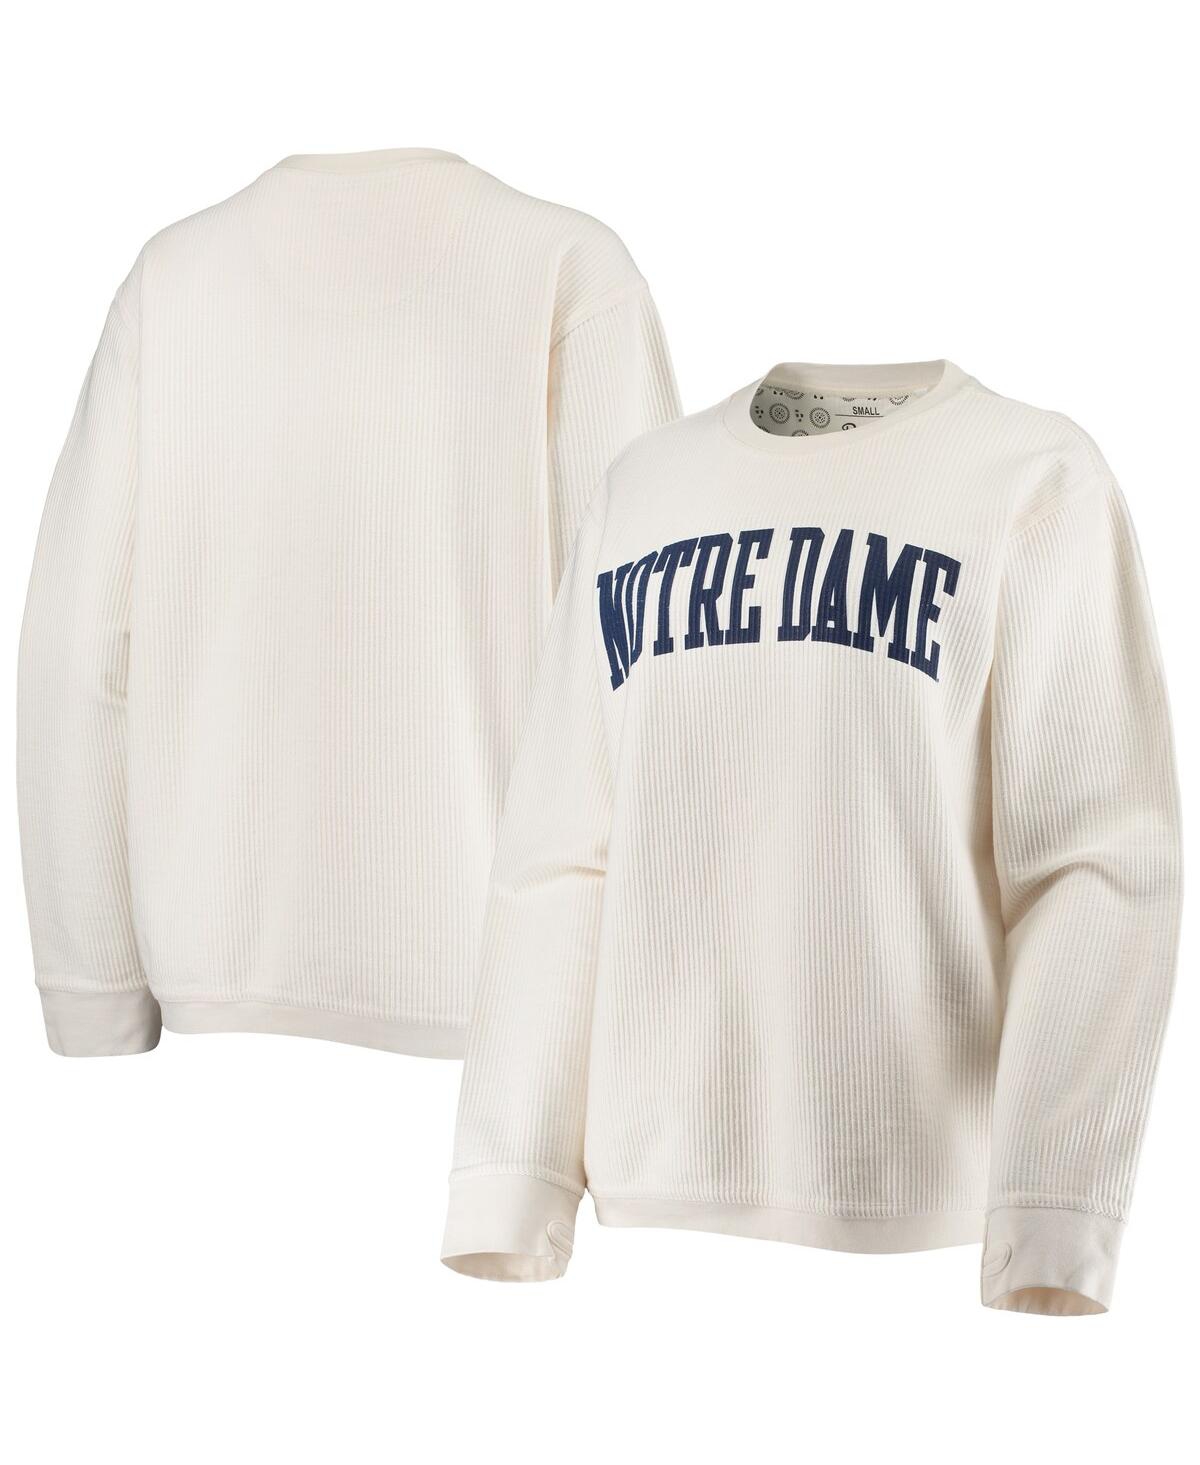 Shop Pressbox Women's  White Notre Dame Fighting Irish Comfy Cord Vintage-like Wash Basic Arch Pullover Sw